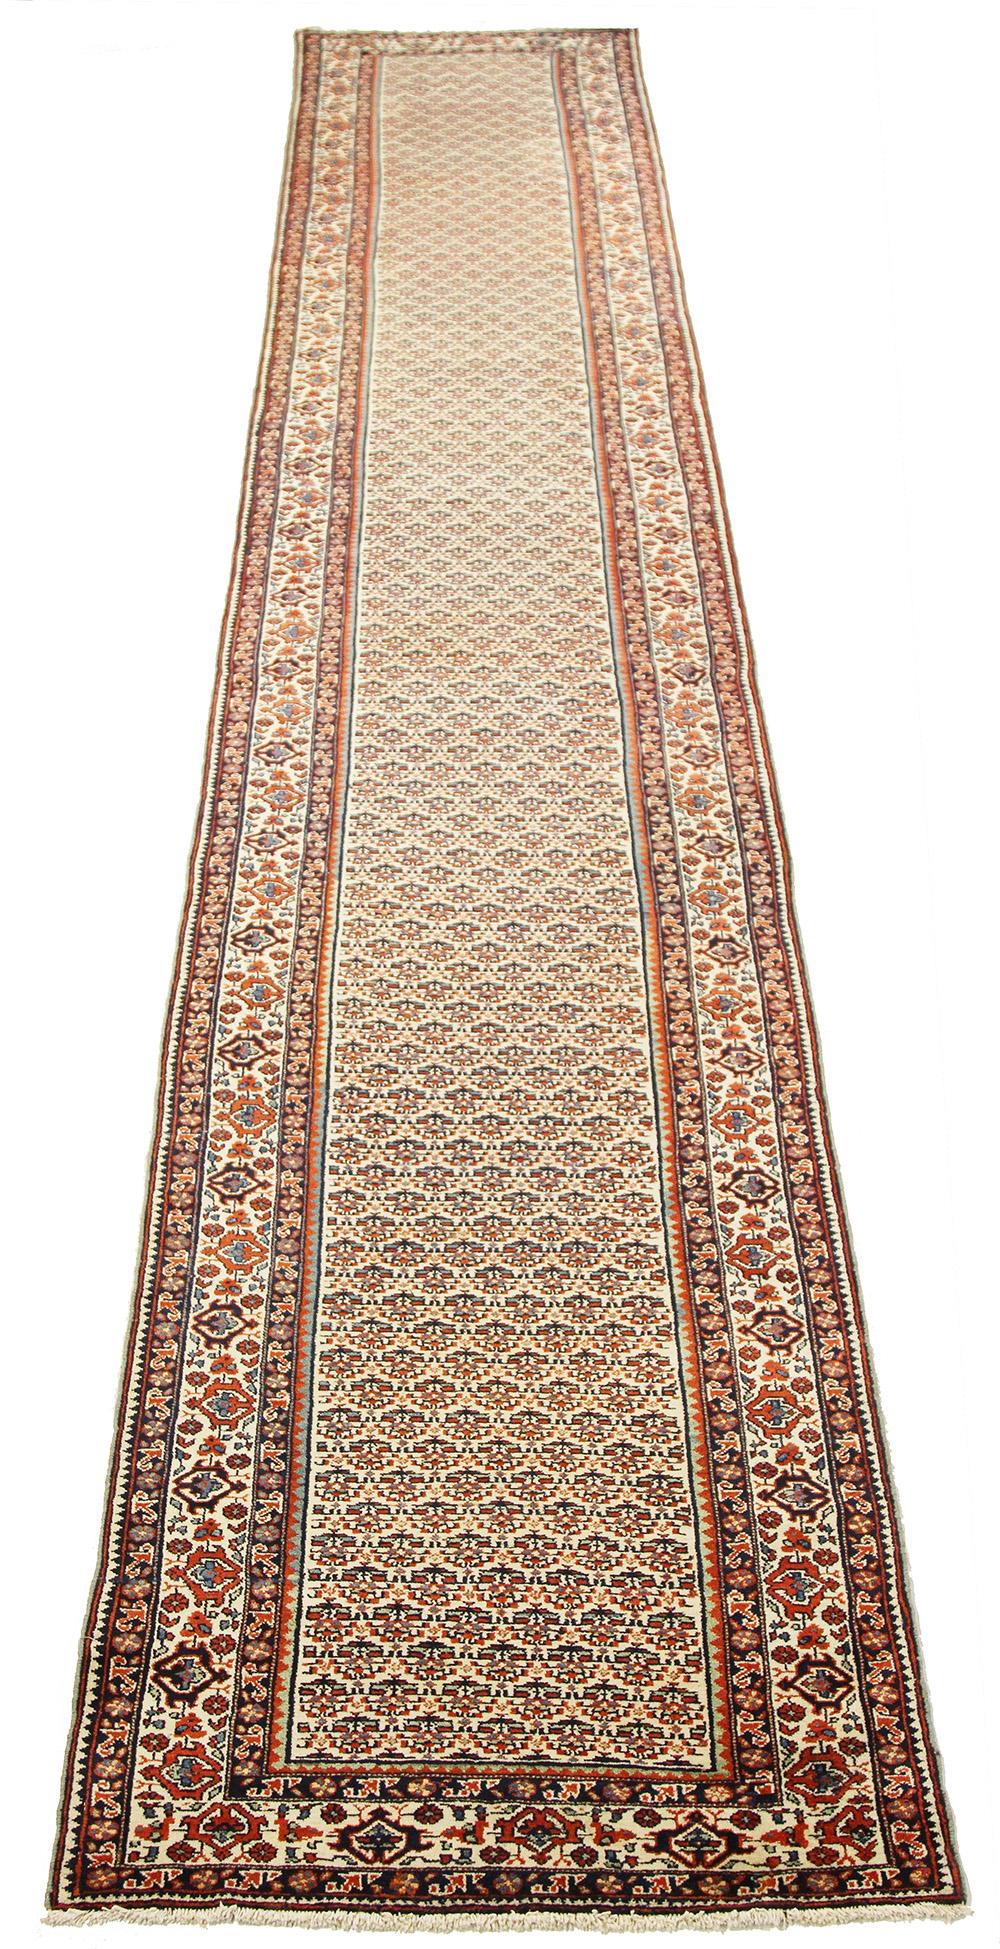 Antique Persian runner rug handwoven from the finest sheep’s wool and colored with all-natural vegetable dyes that are safe for humans and pets. It’s a traditional Kordi design featuring floral details in red and black over an ivory field. It’s a